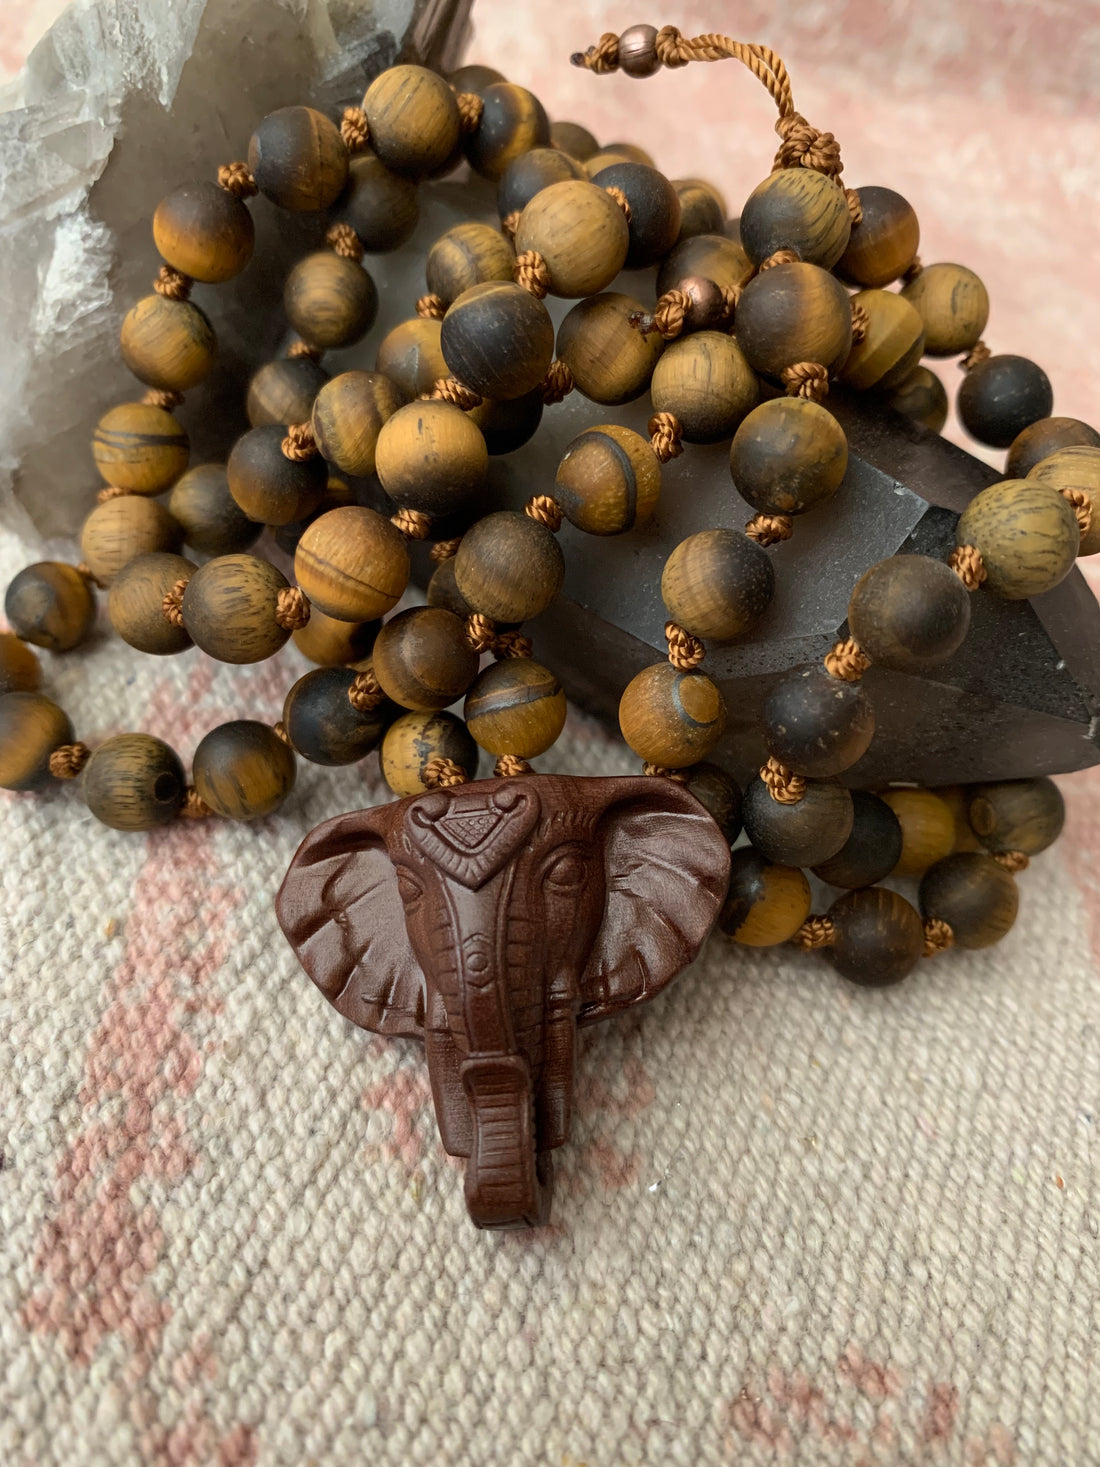 Mala Beads and Mental Health: How They Can Benefit You